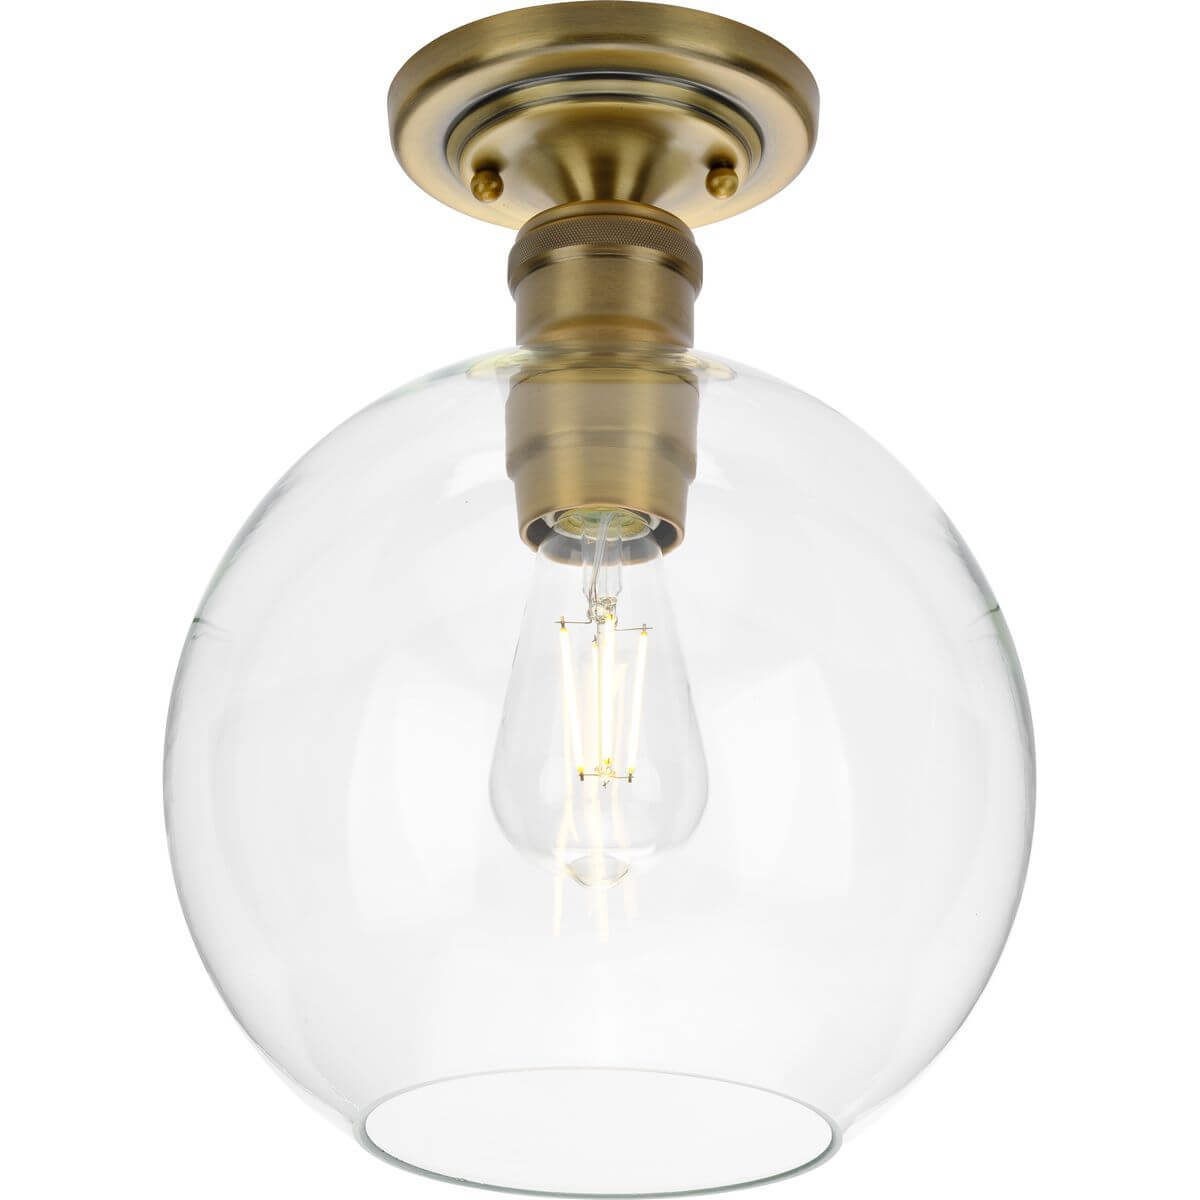 Progress Lighting P350046-163 Hansford 1 Light 10 inch Flush Mount in Vintage Brass with Clear Glass